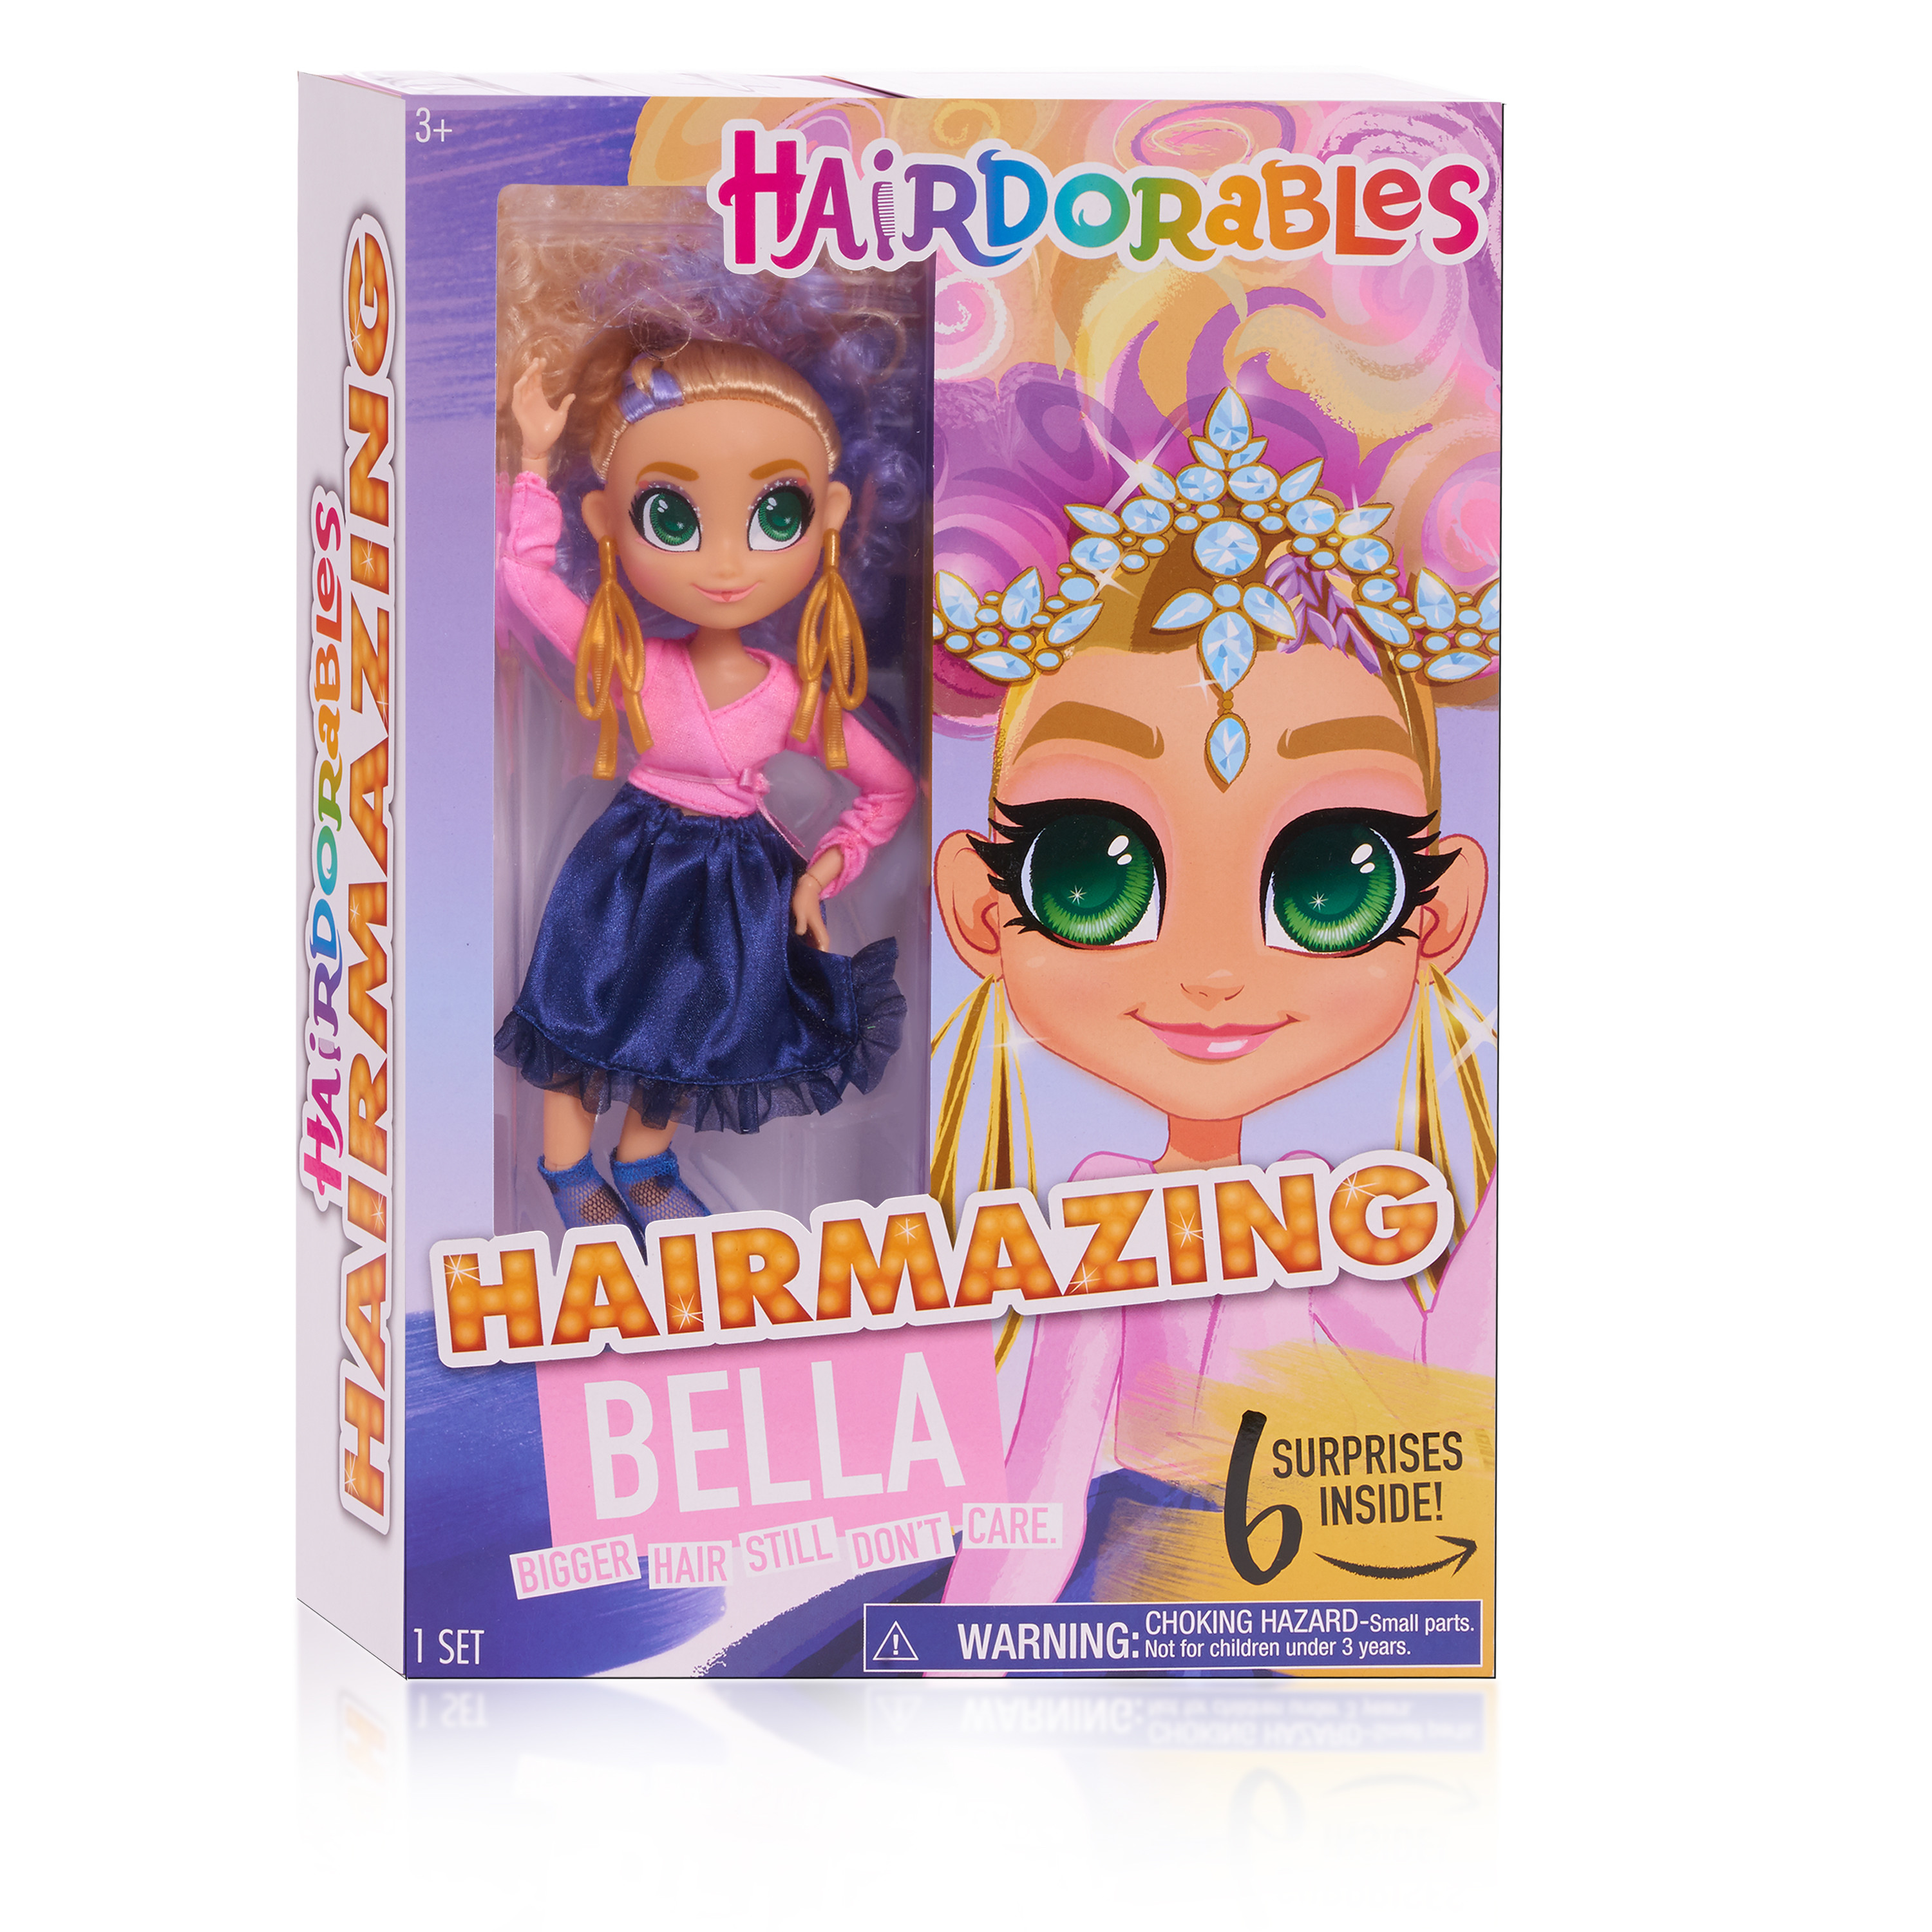 Hairdorables Hairmazing Bella Fashion Doll, Blonde and Purple Curly Hair, Pink Outfit, Ballerina Dancer,  Kids Toys for Ages 3 Up, Gifts and Presents - image 5 of 5